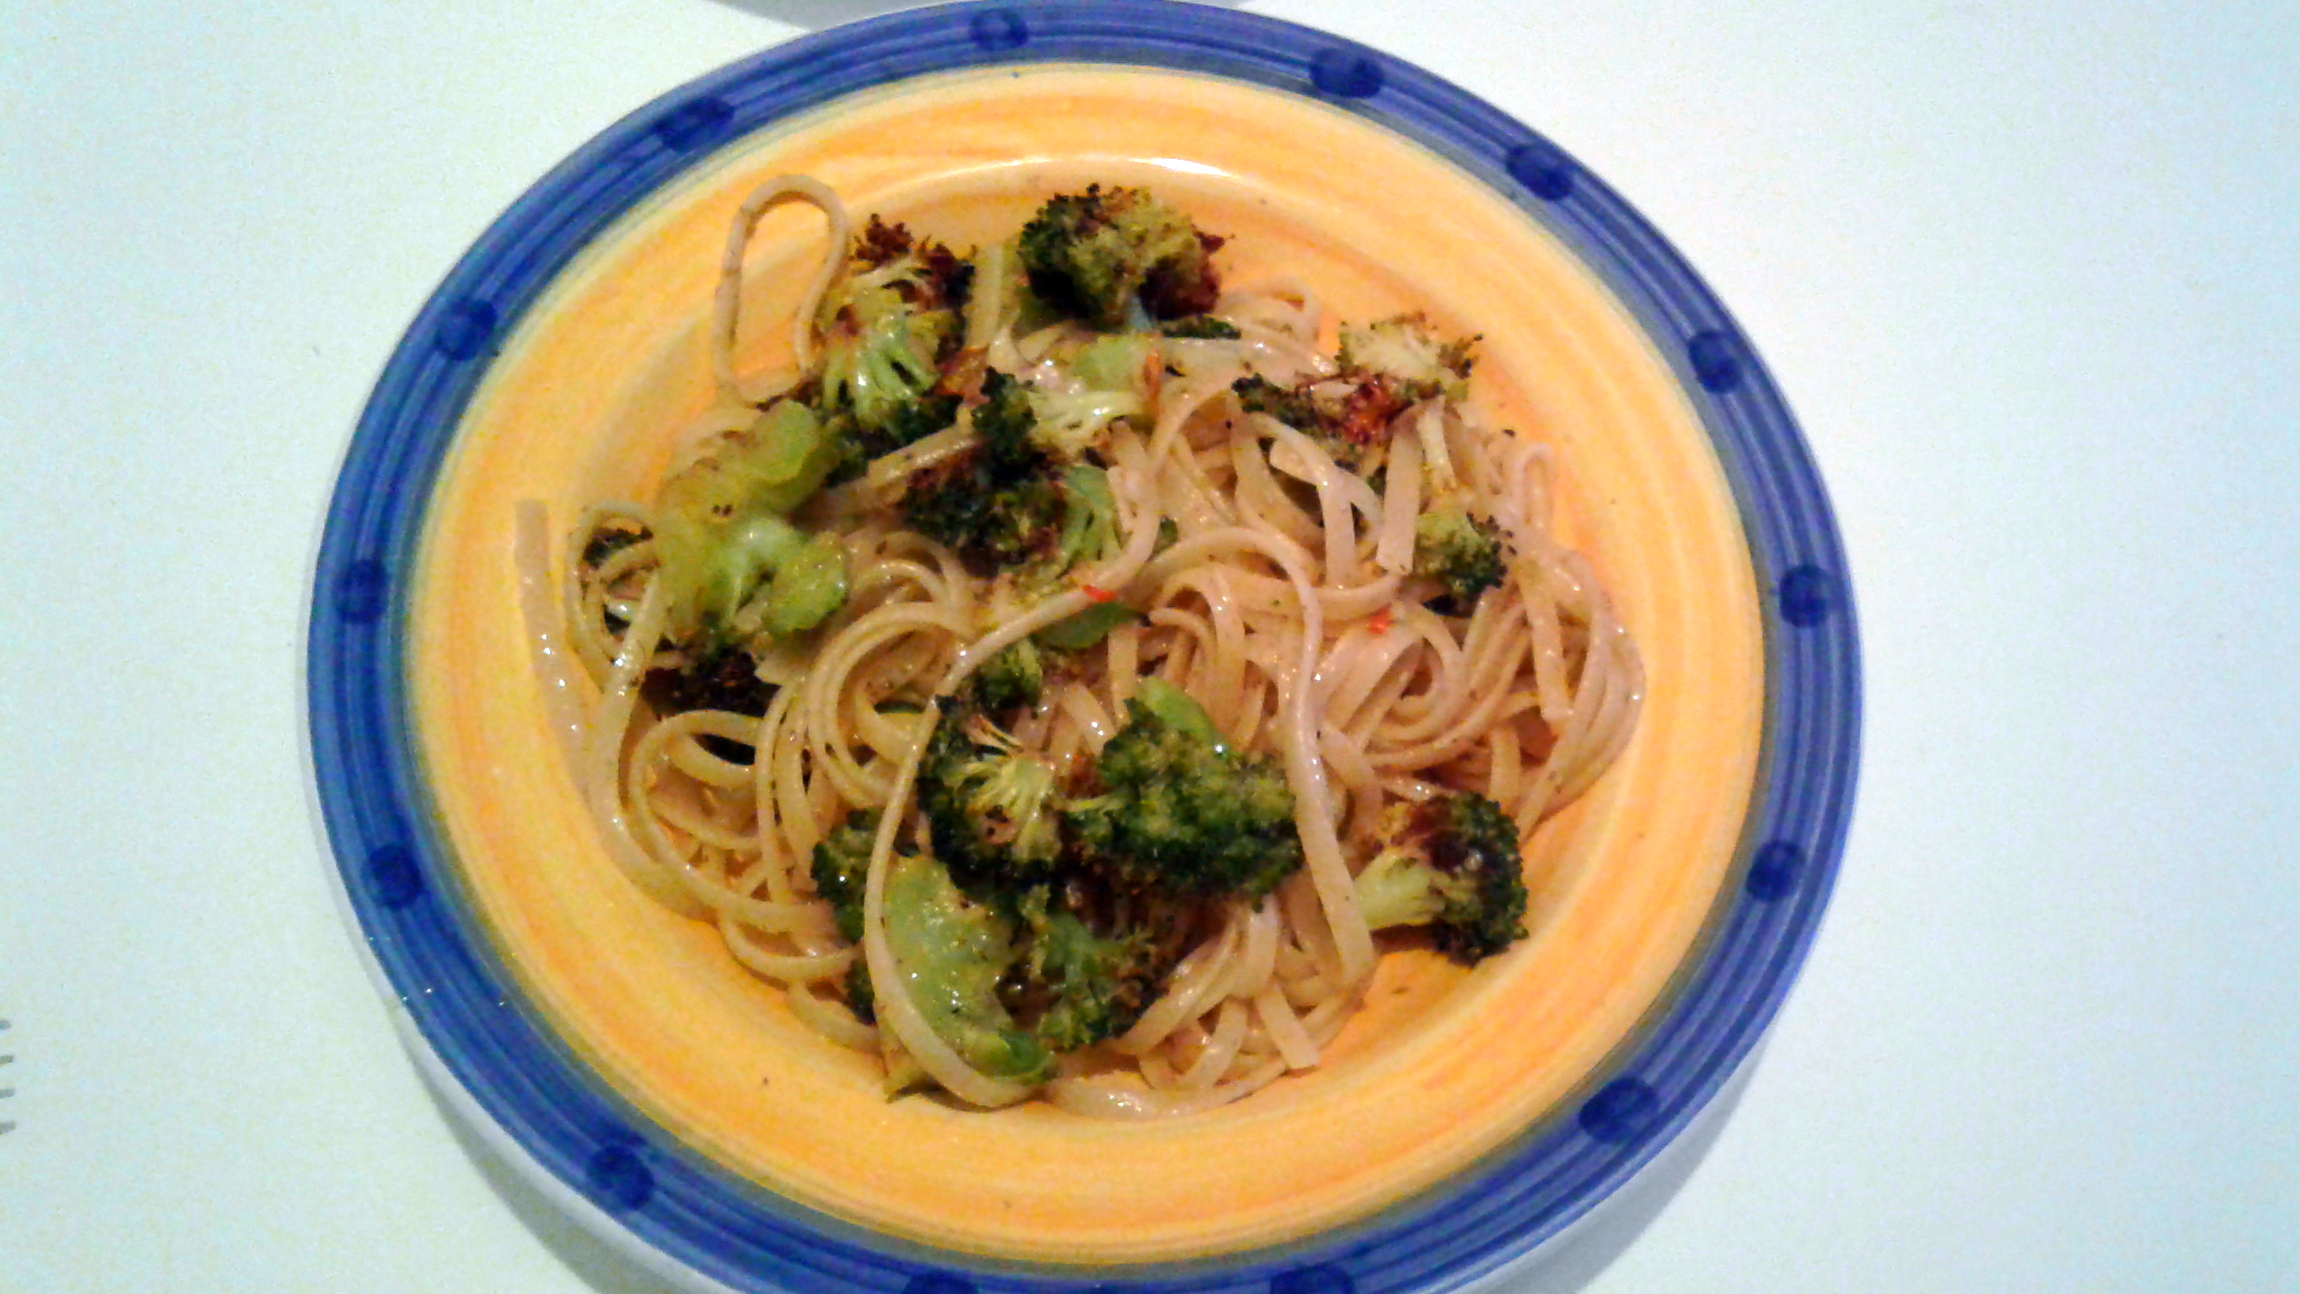 Spicy Pasta with Broccoli, Anchovy, and Garlic